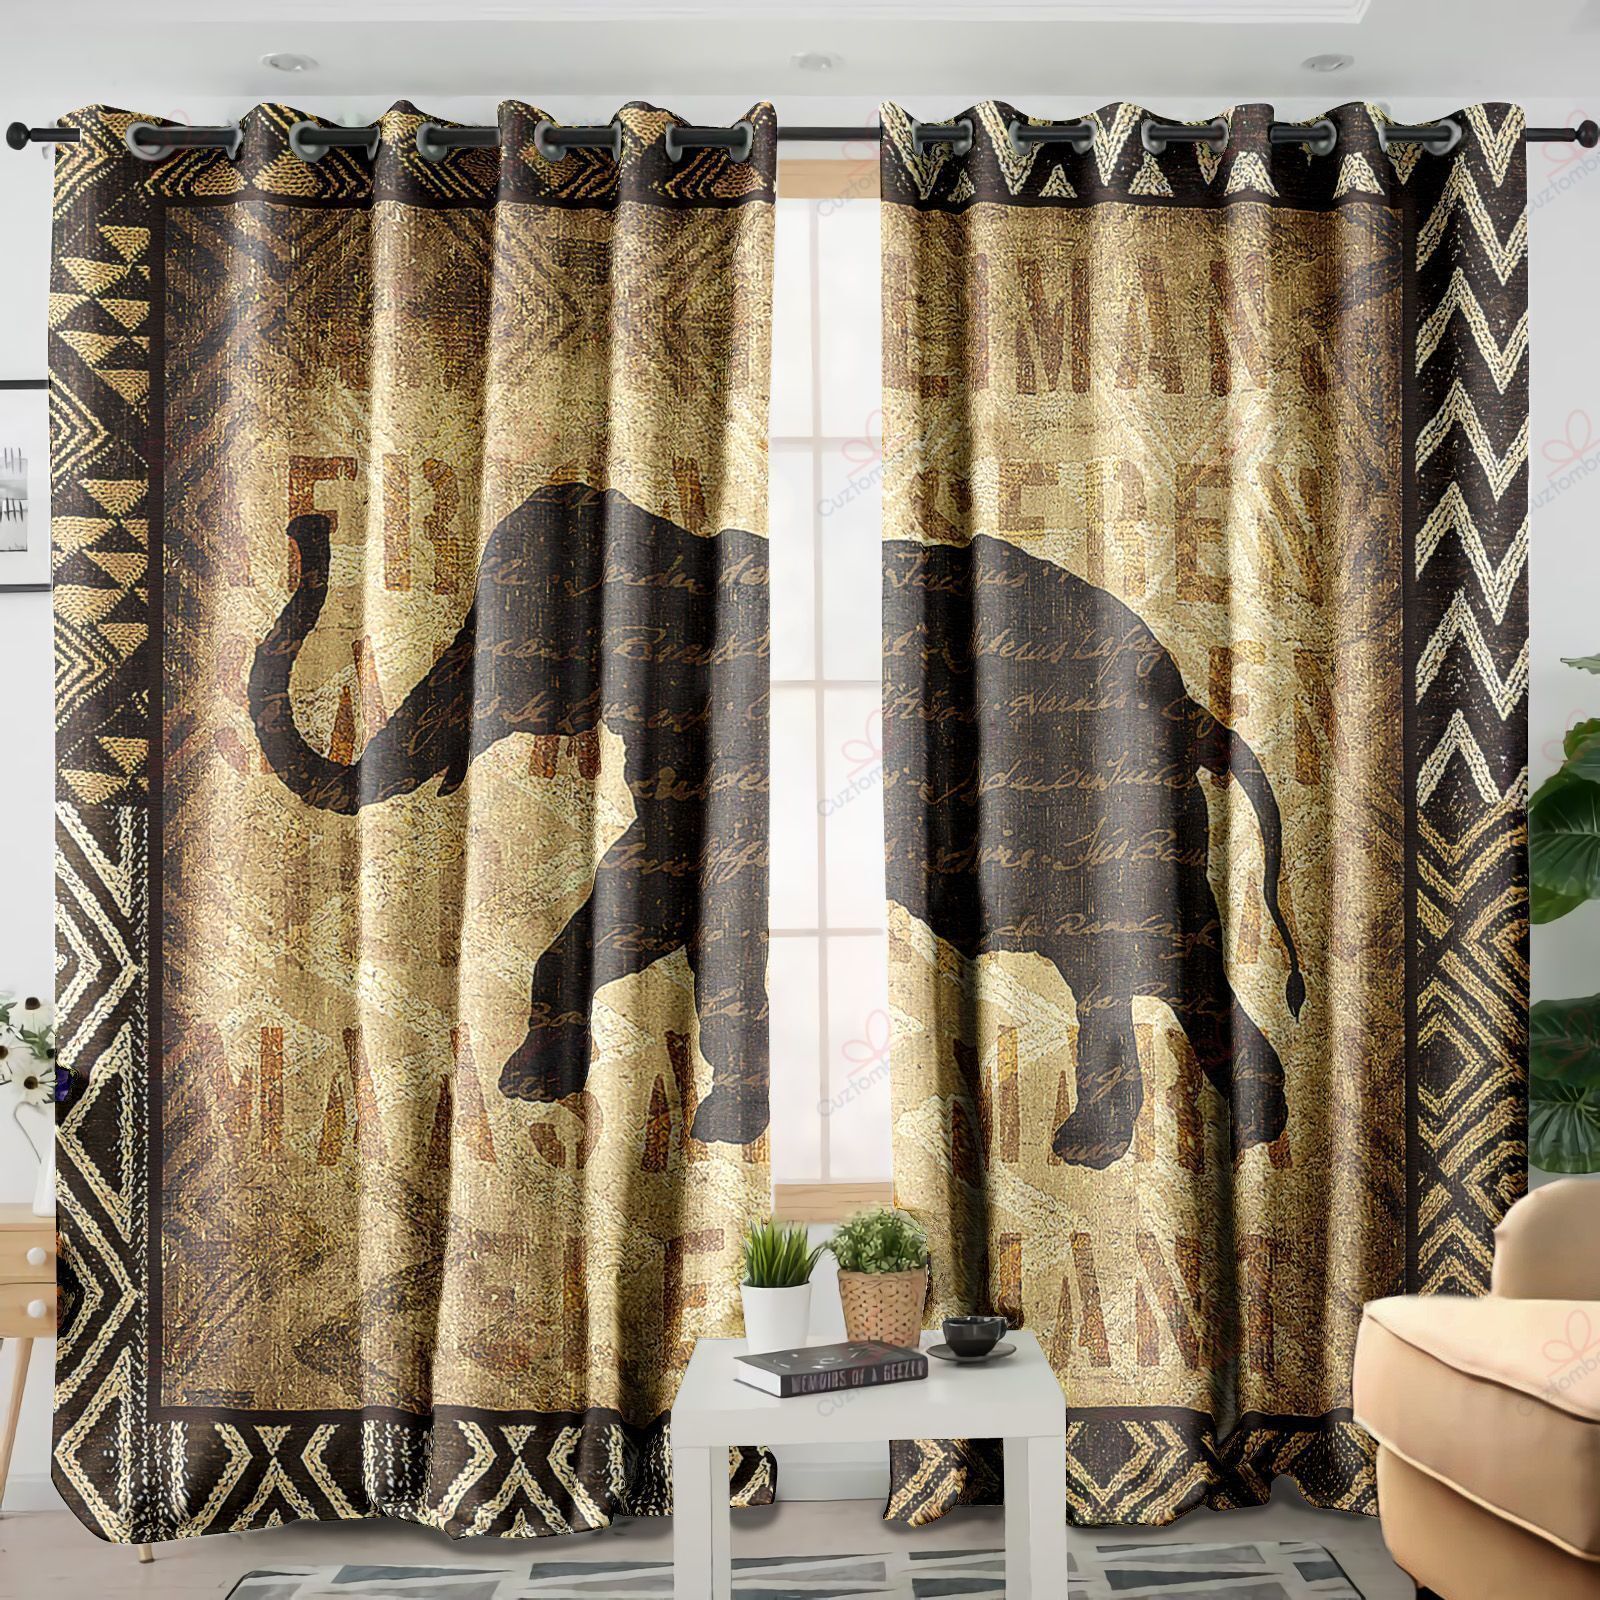 African Elephant Patchwork Printed Window Curtain Home Decor